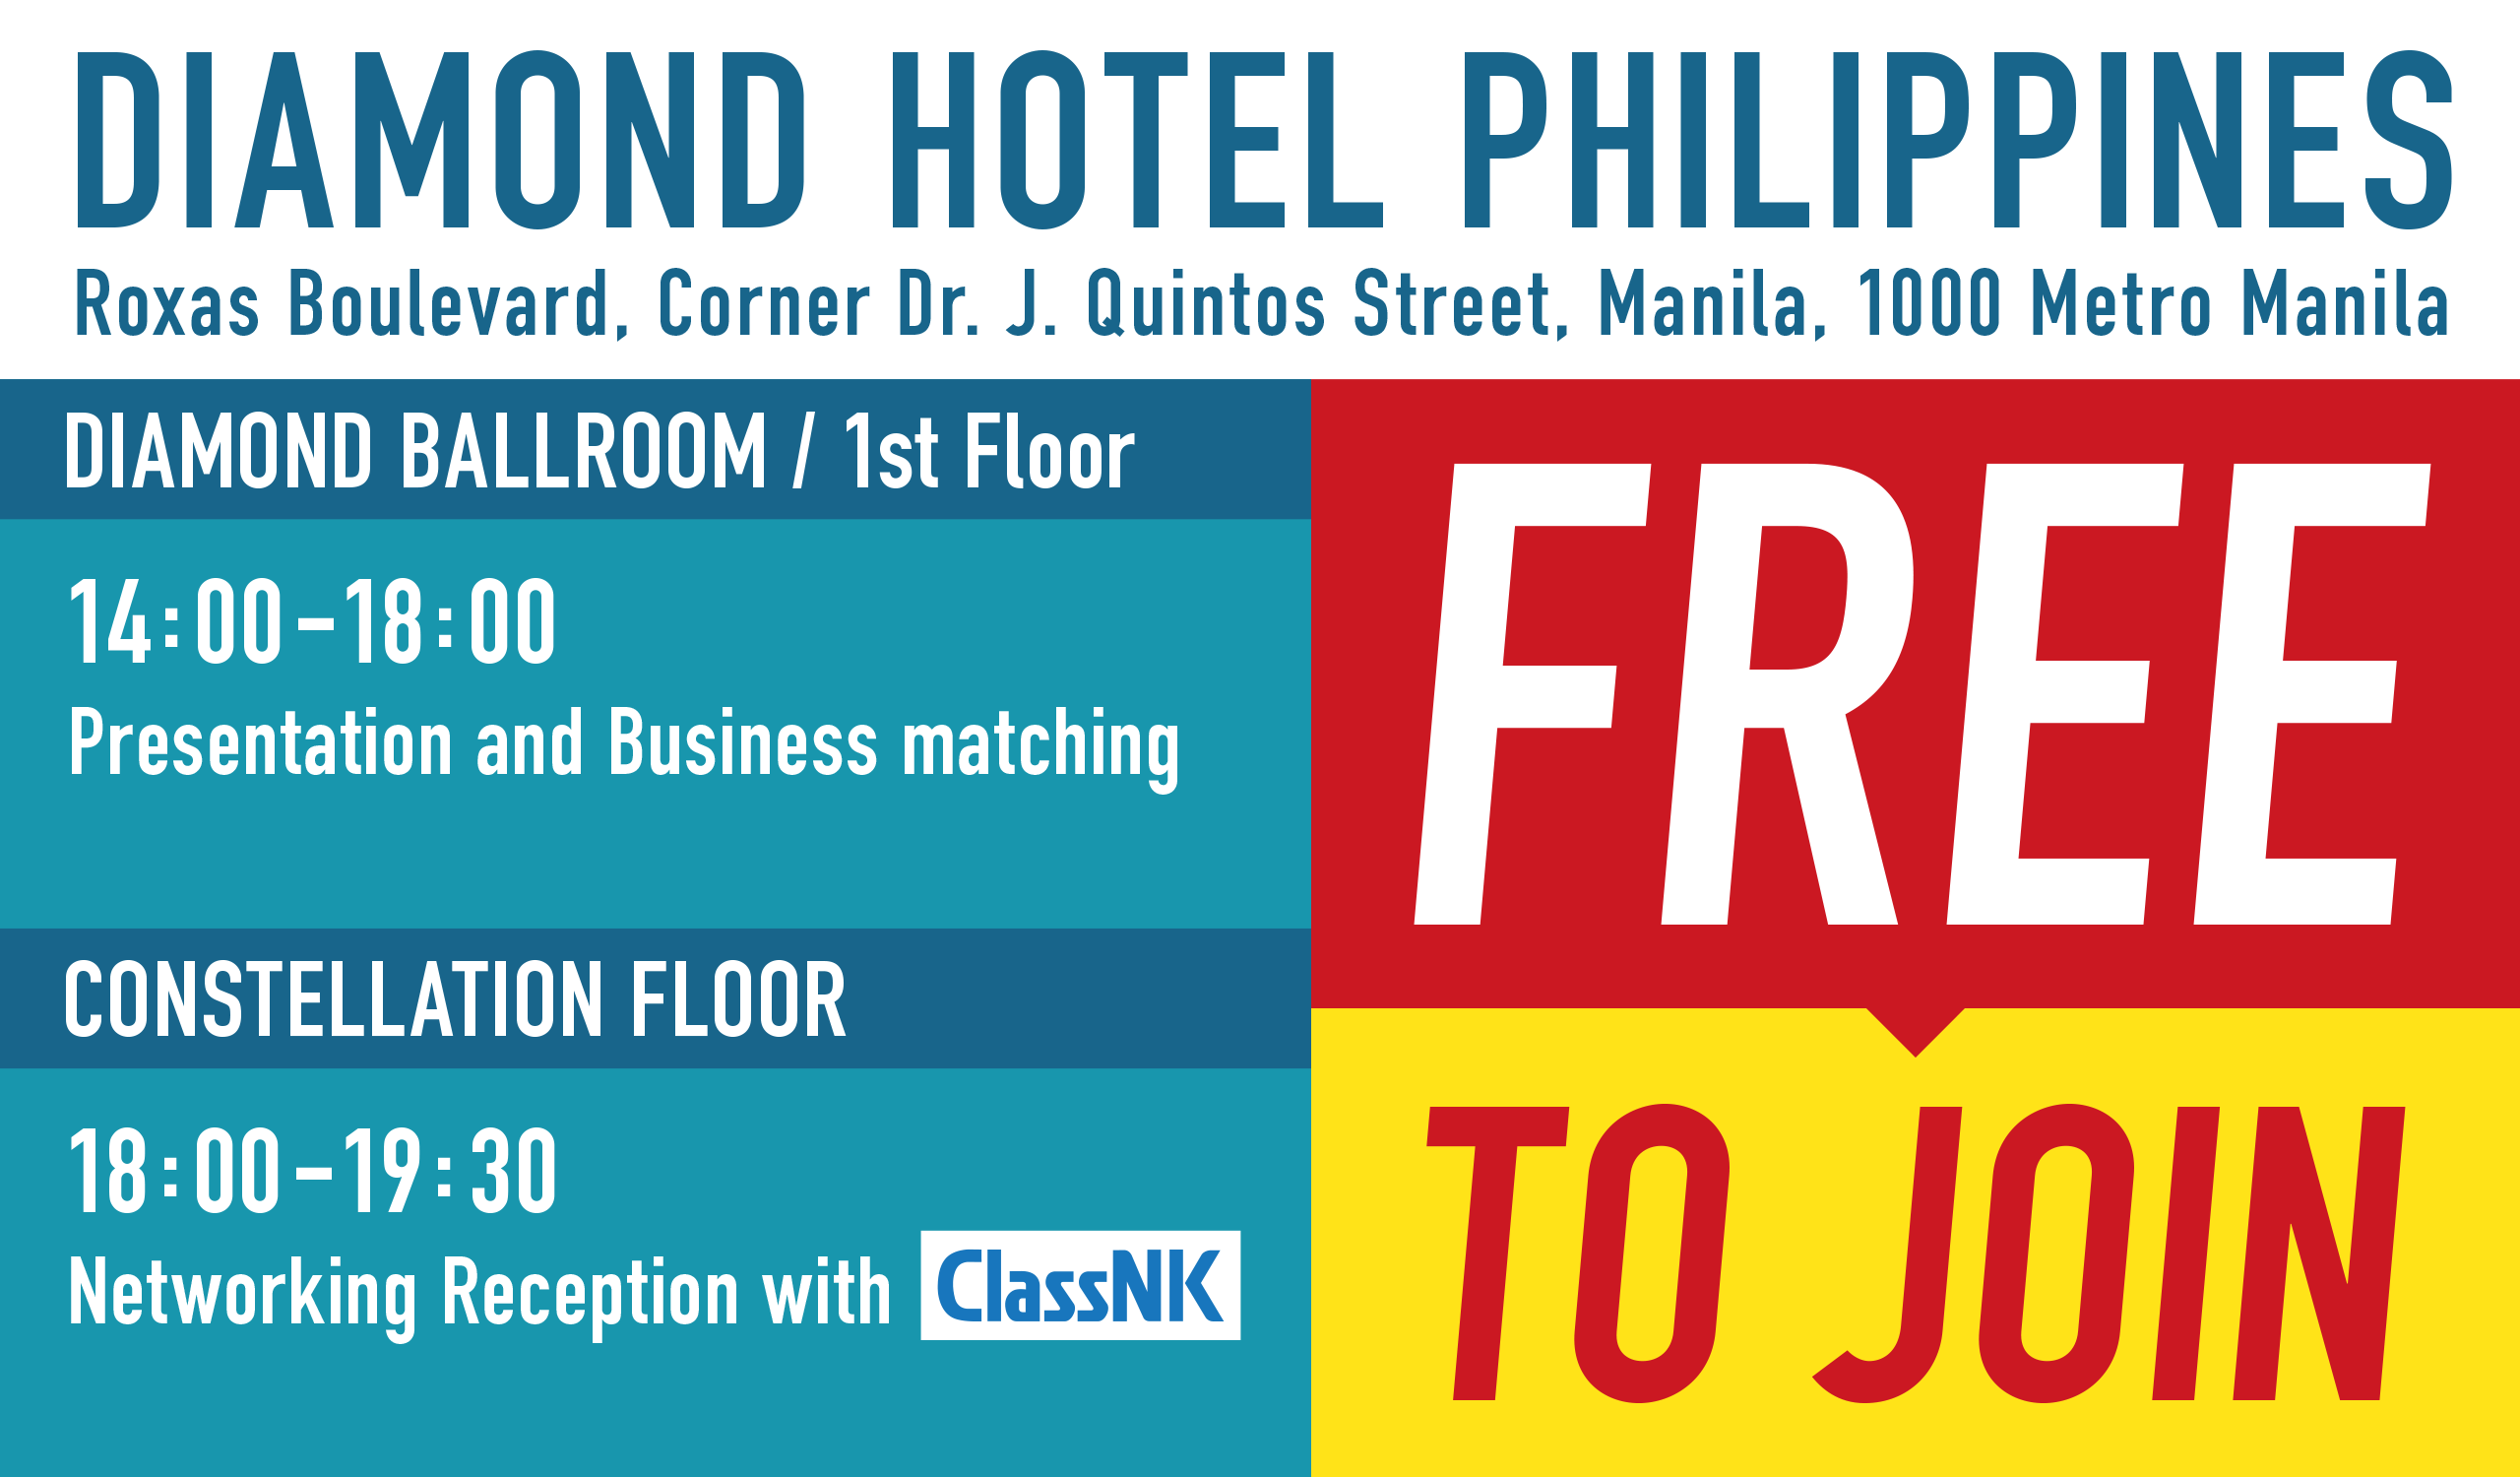 DIAMOND HOTEL PHILIPPINES FREE TO JOIN